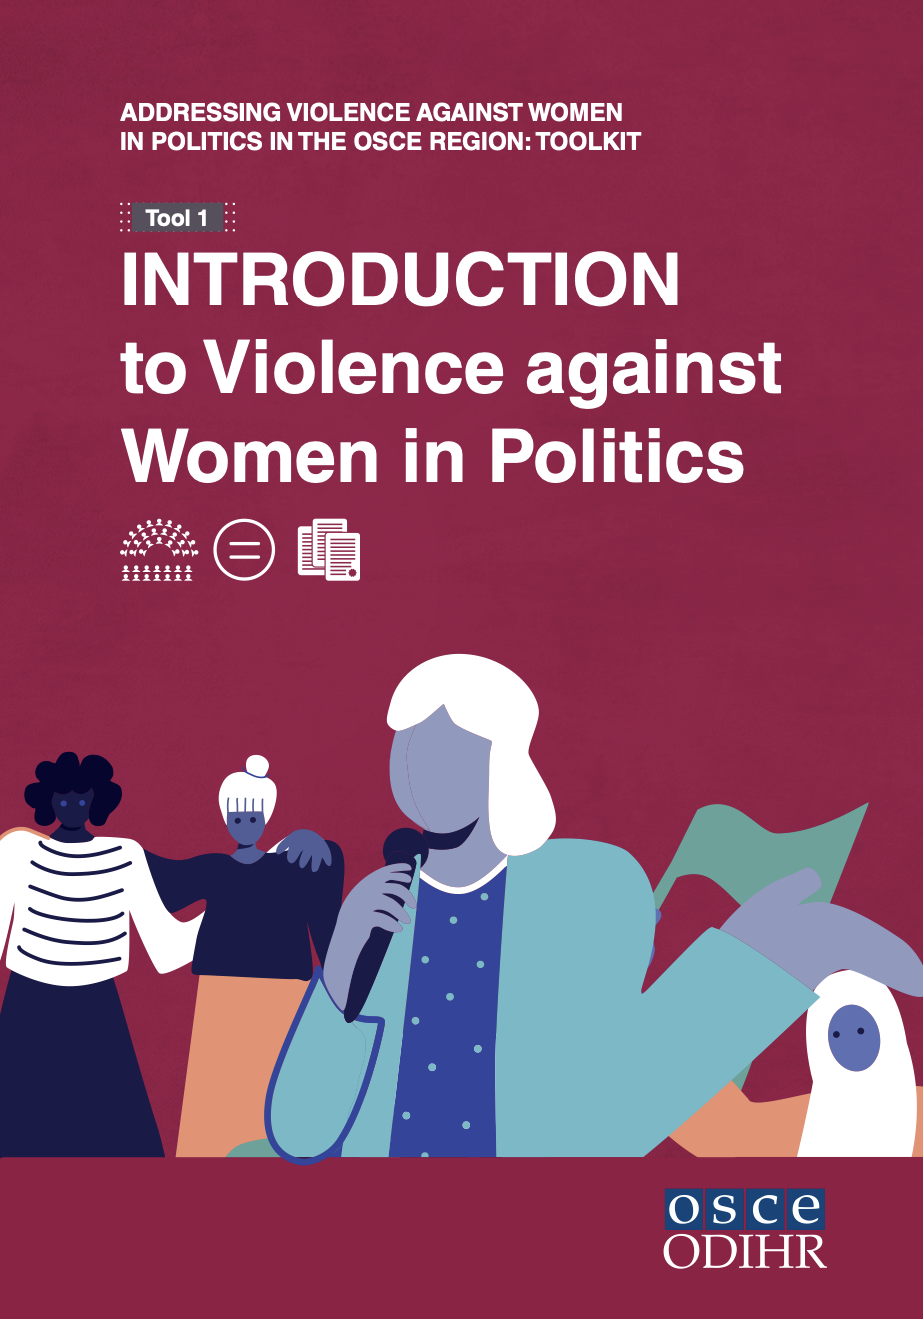 Introduction to Violence against Women in Politics - Tool 1